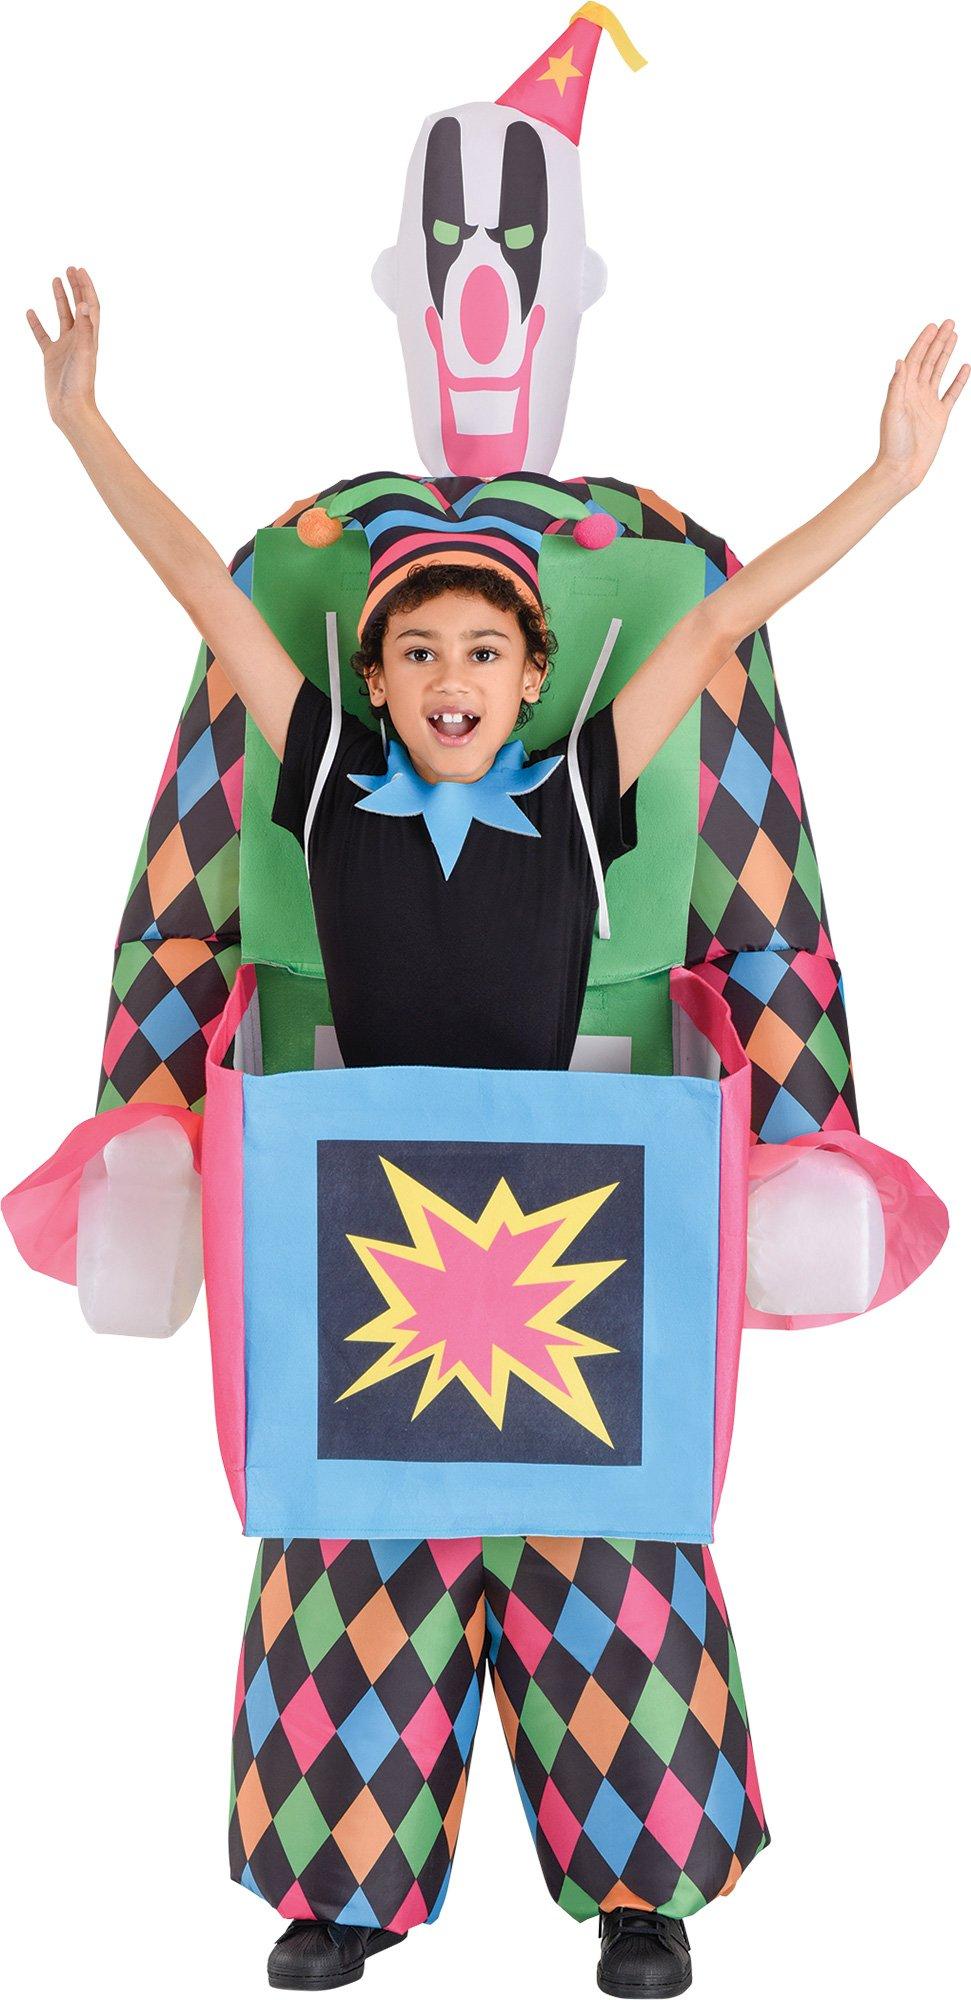 Kids' Inflatable Jack in the Box Costume